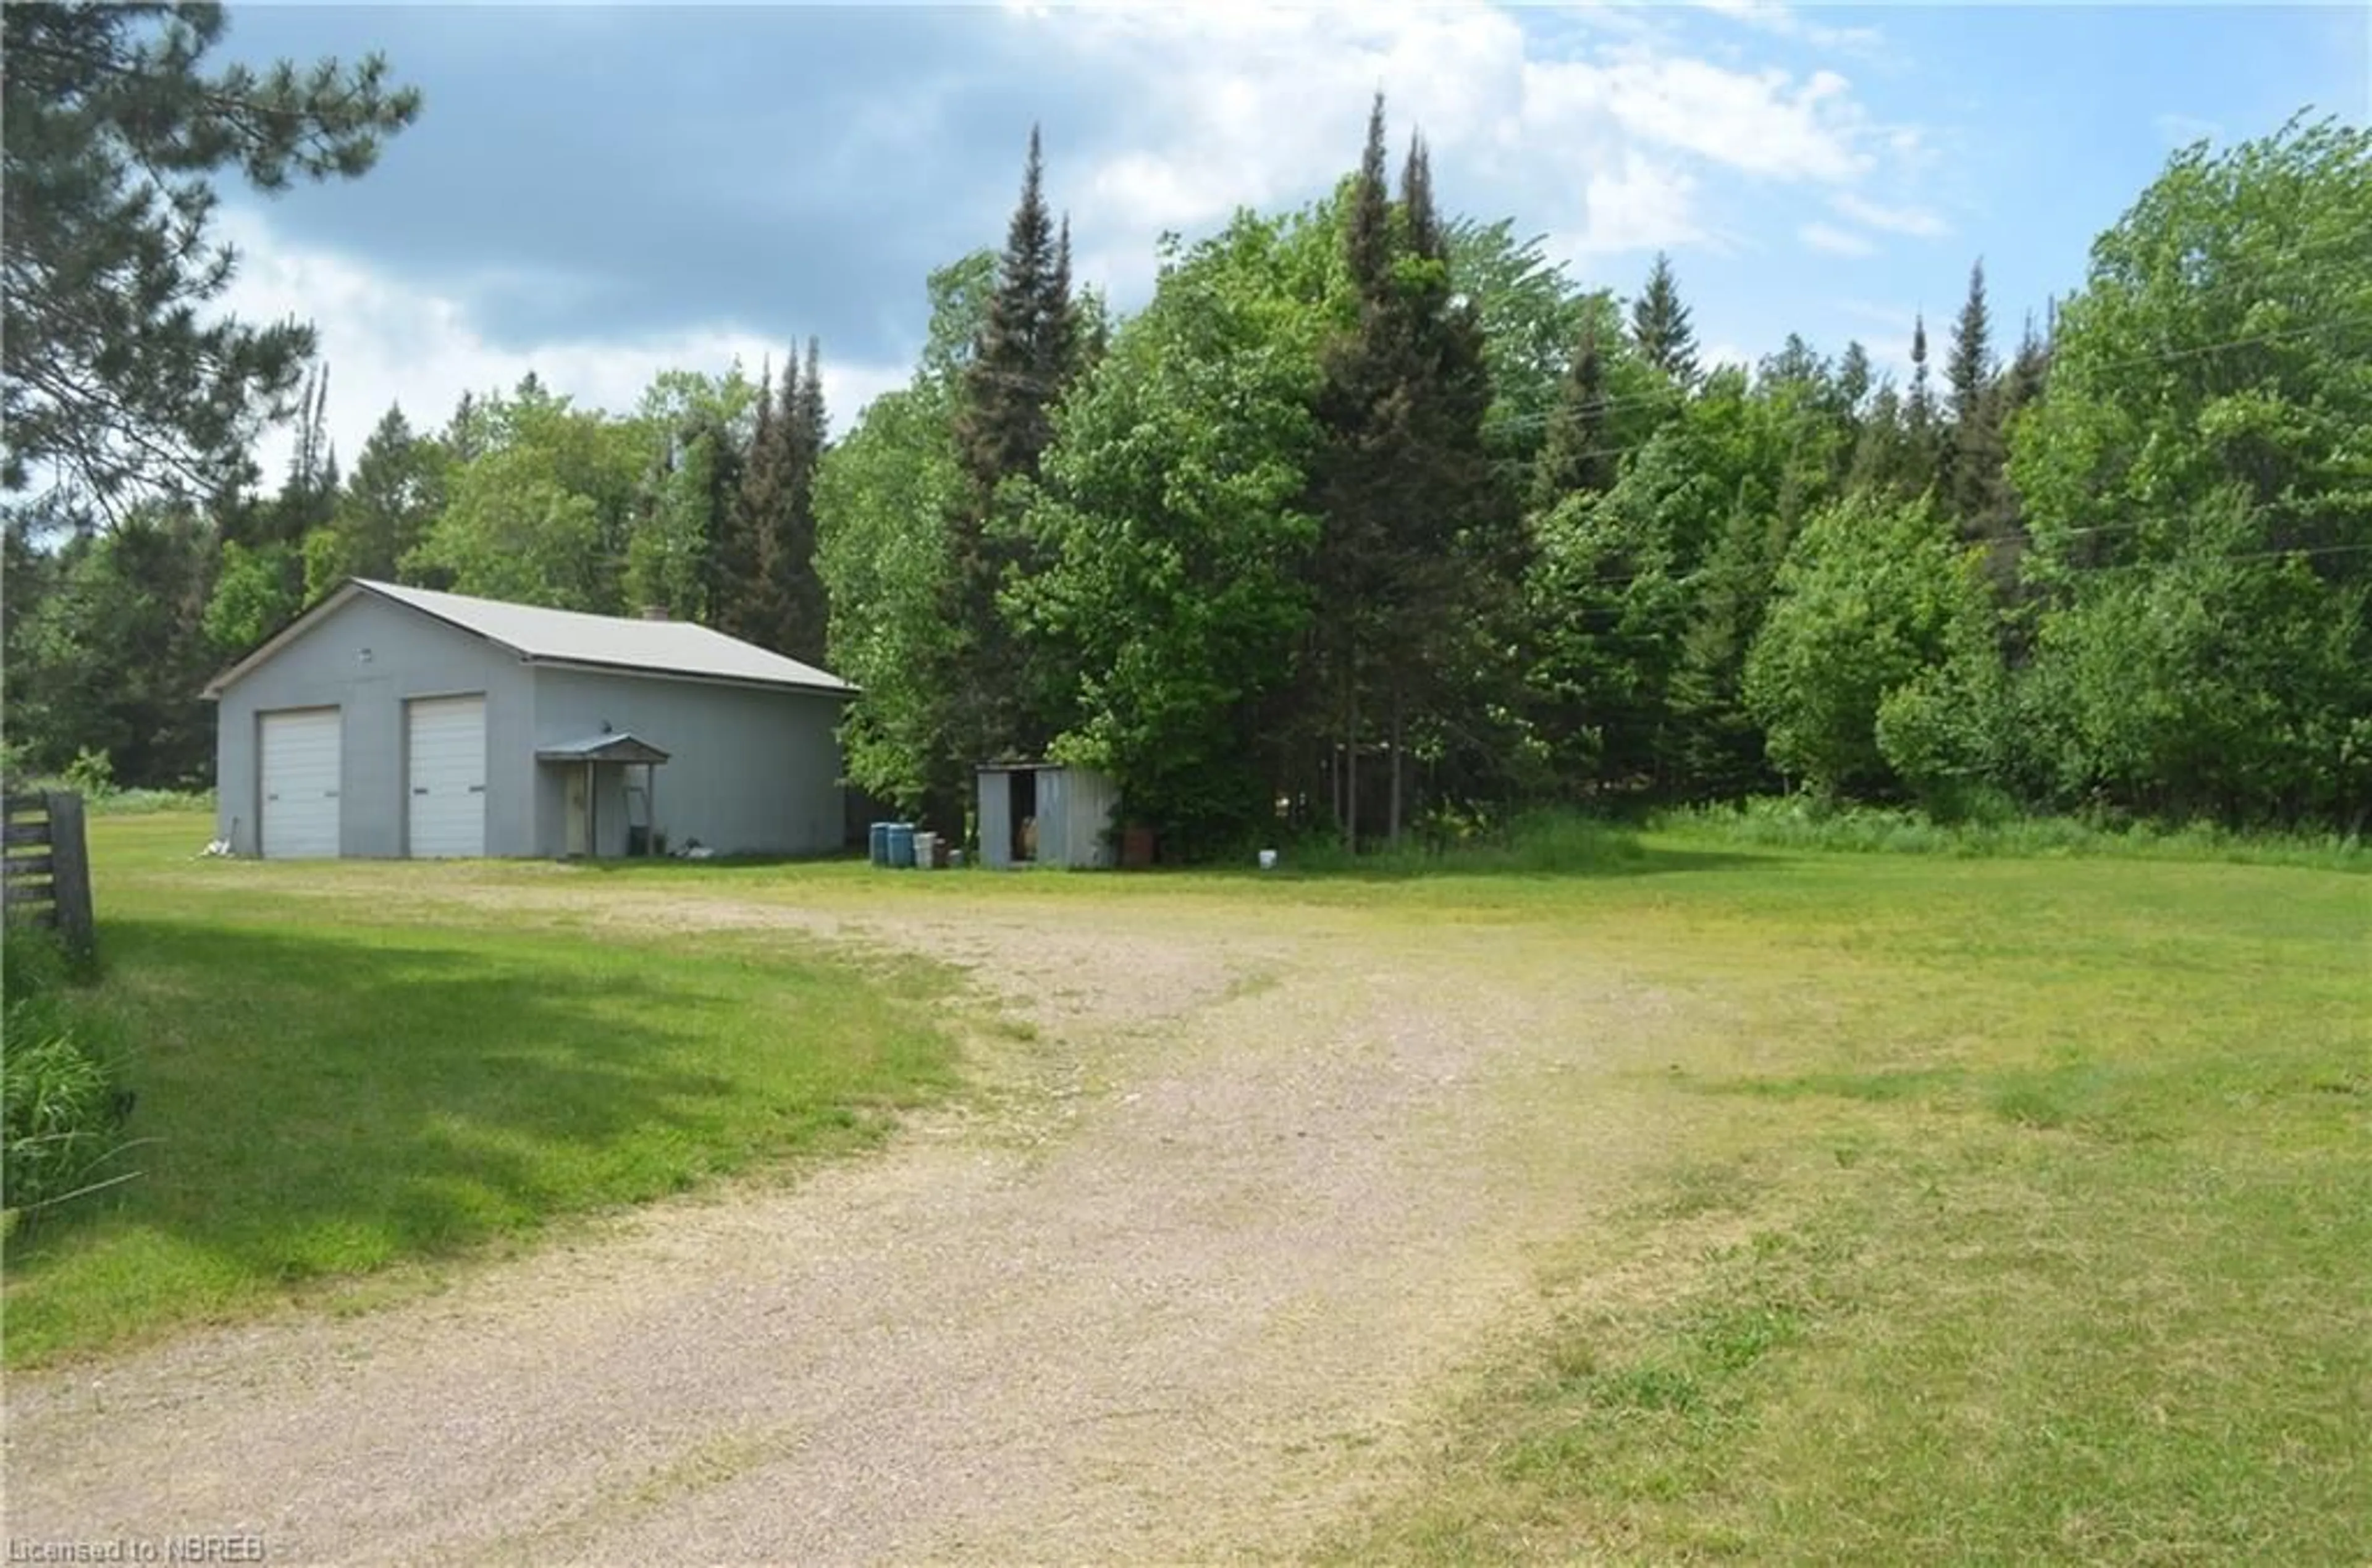 Shed for 736 Highway 534, Powassan Ontario P0H 1Z0